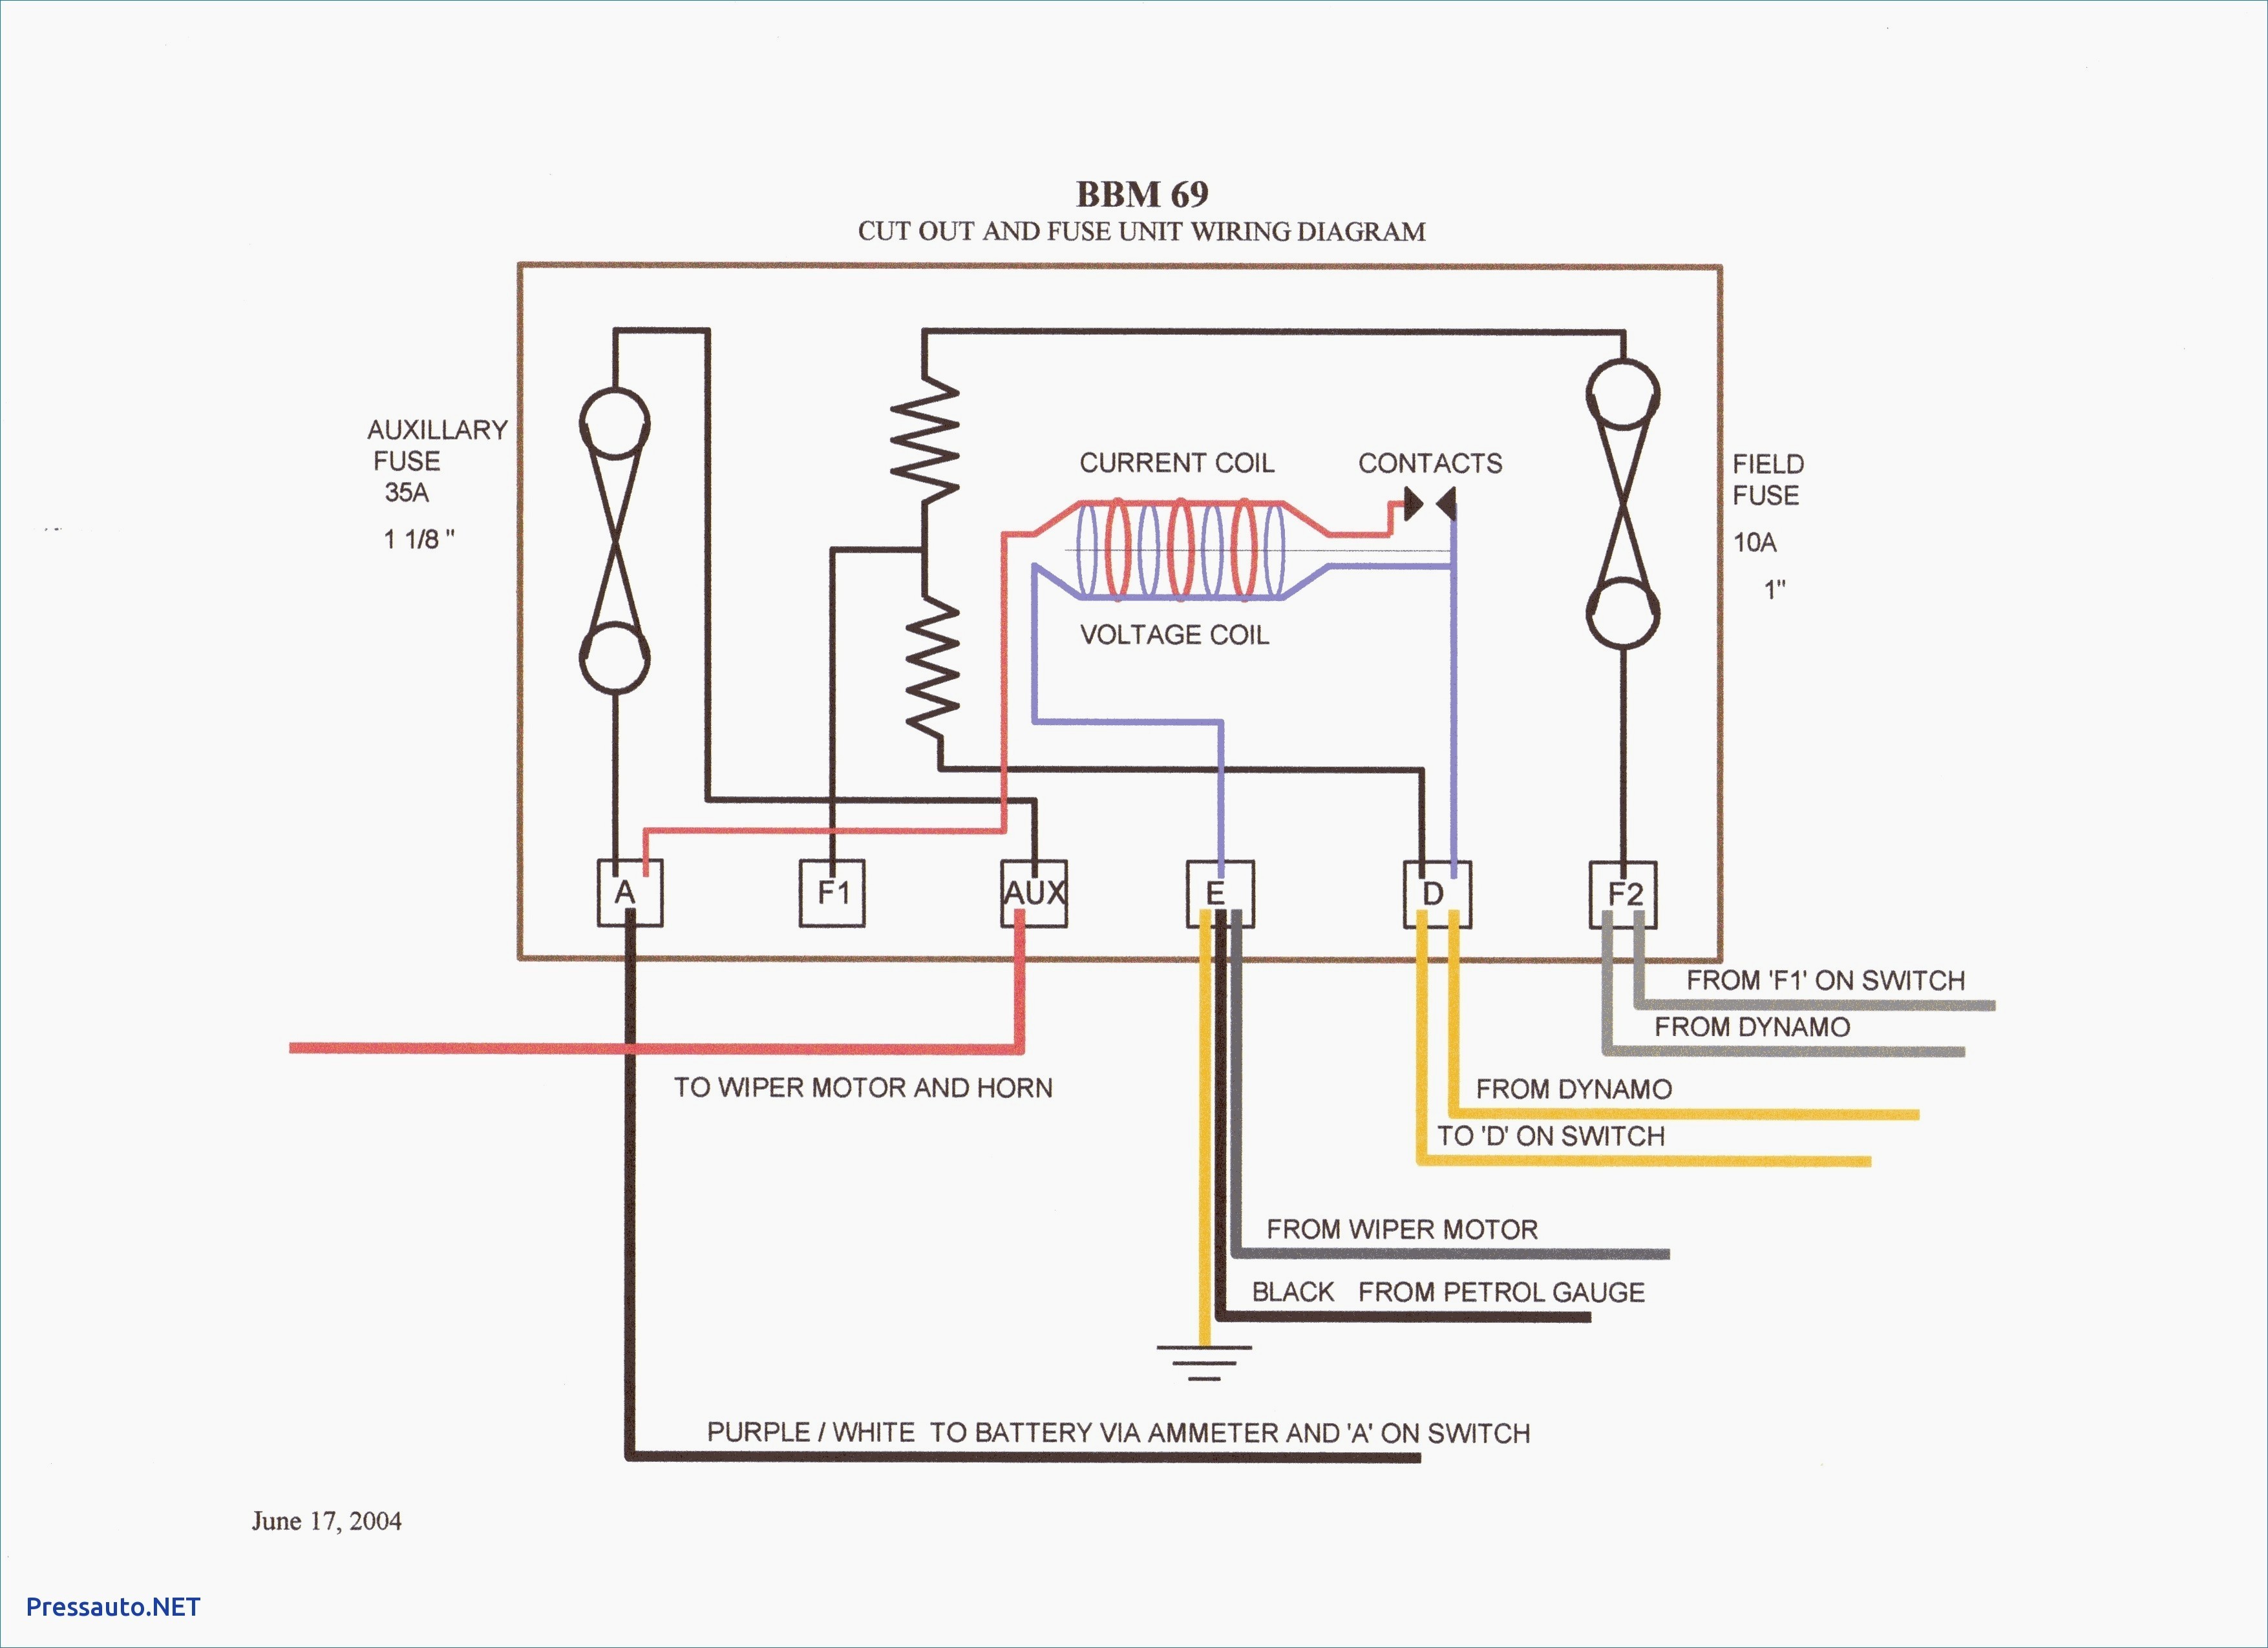 Wiring Diagram Electric Water Heater Best Electric Water Heater Wiring Diagram Awesome Wiring Diagram Hot